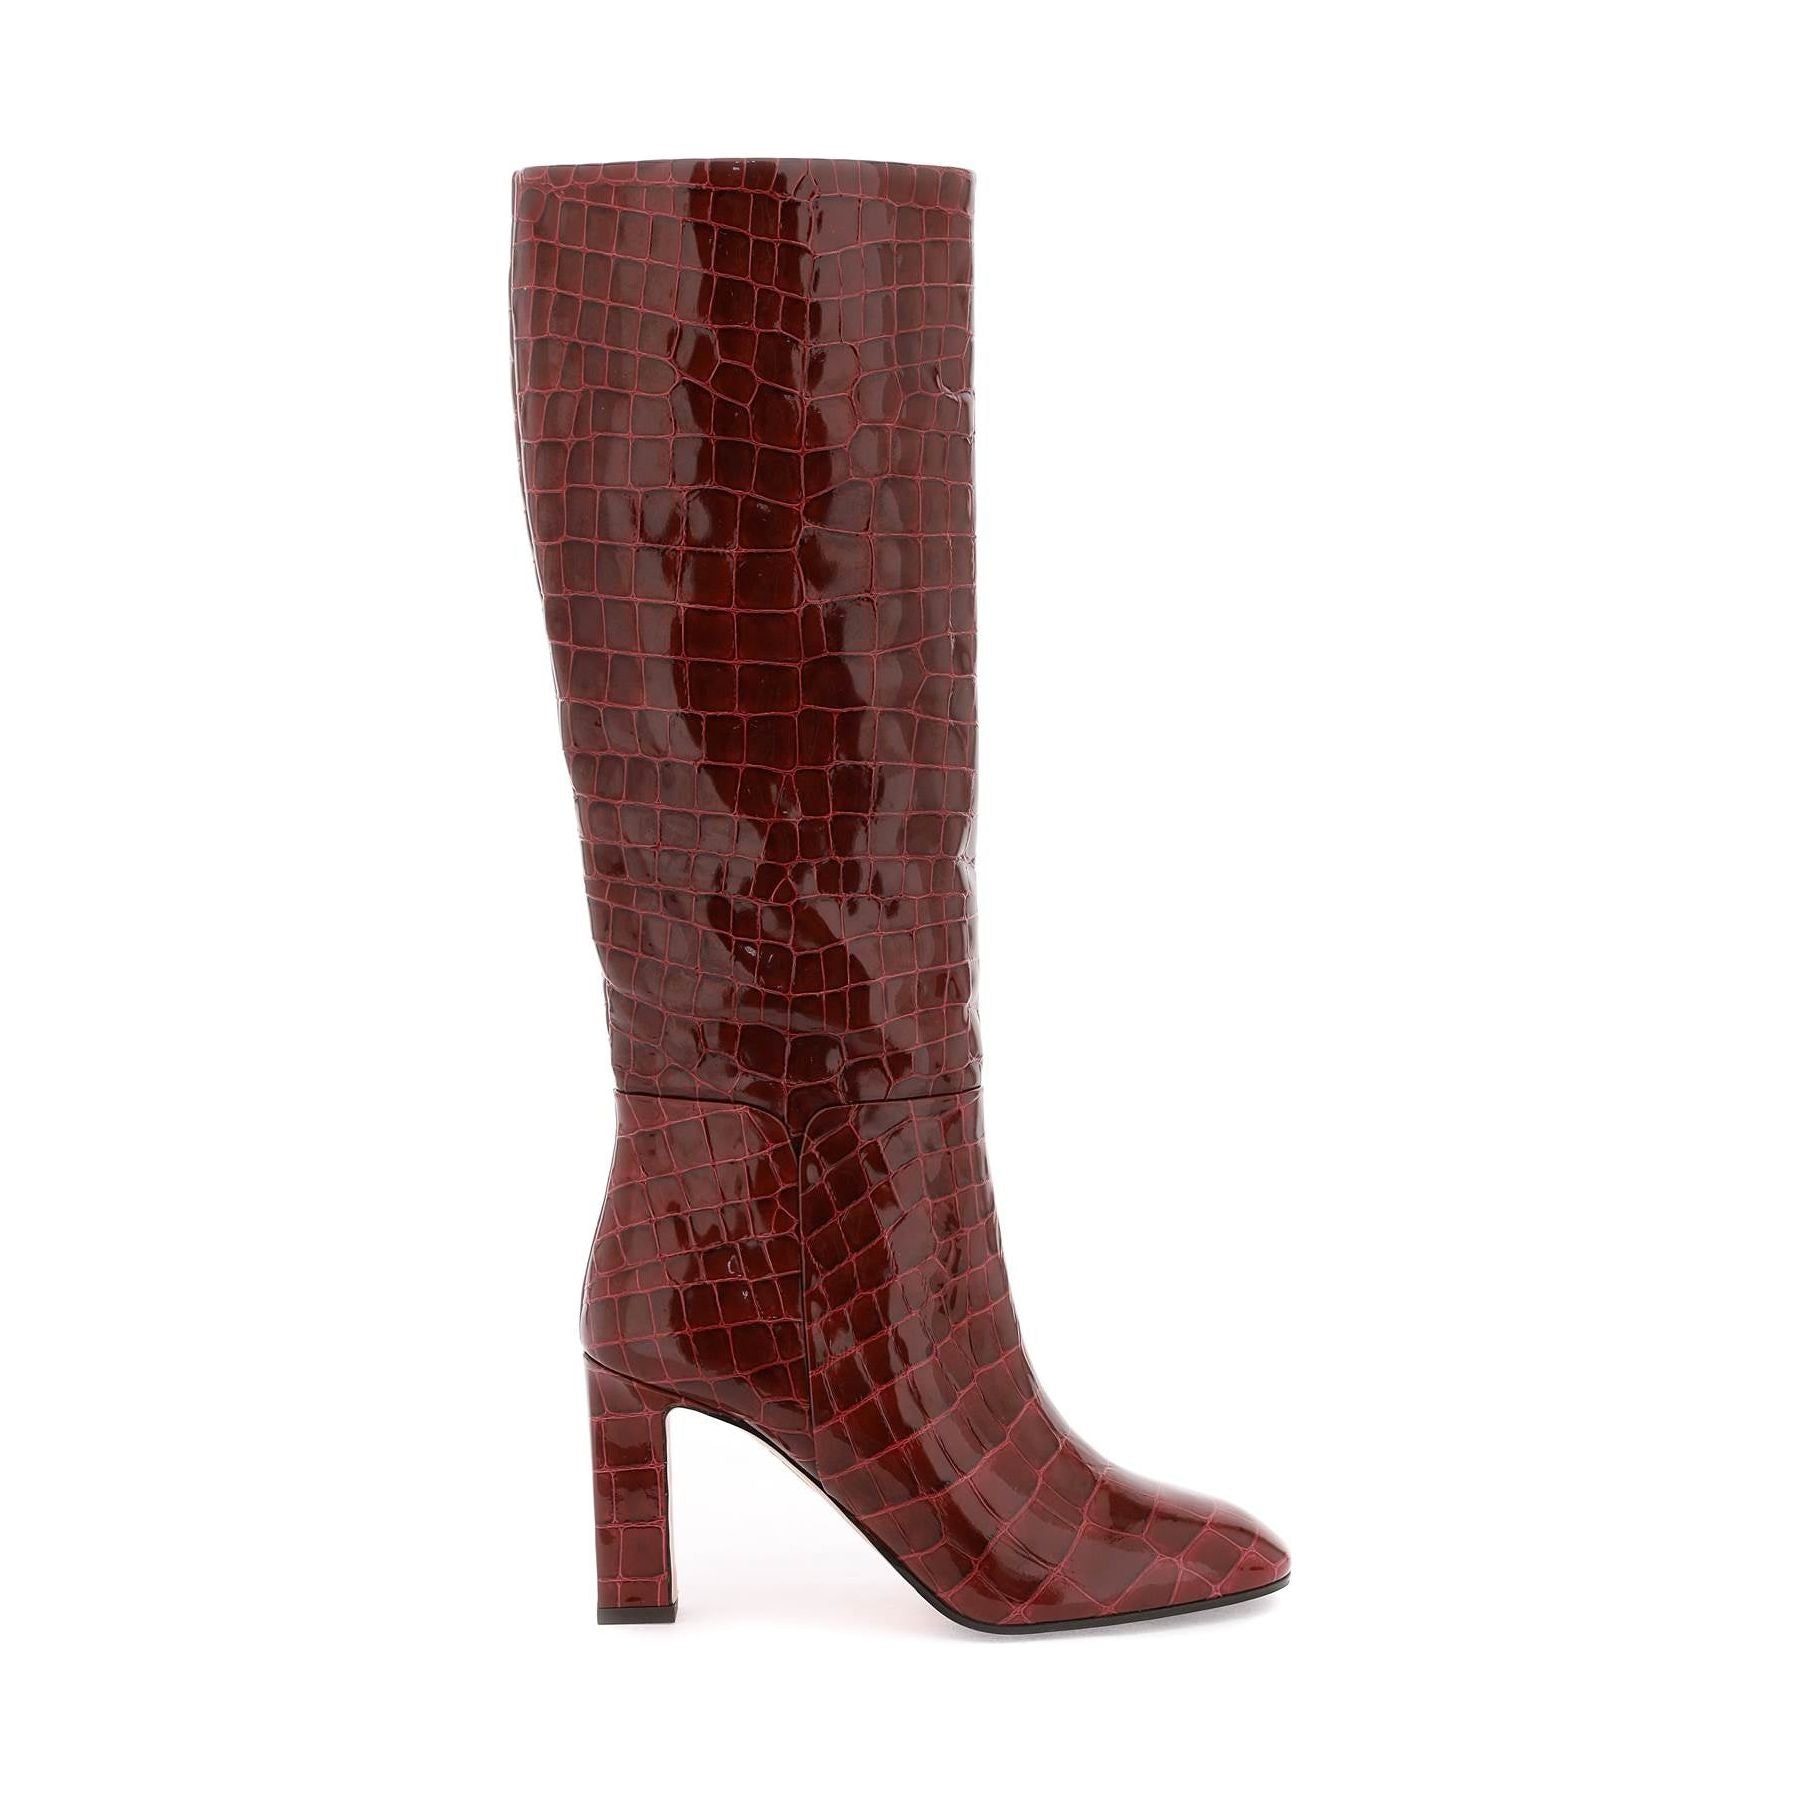 Croc-Embossed Leather Sellier 85 Boots